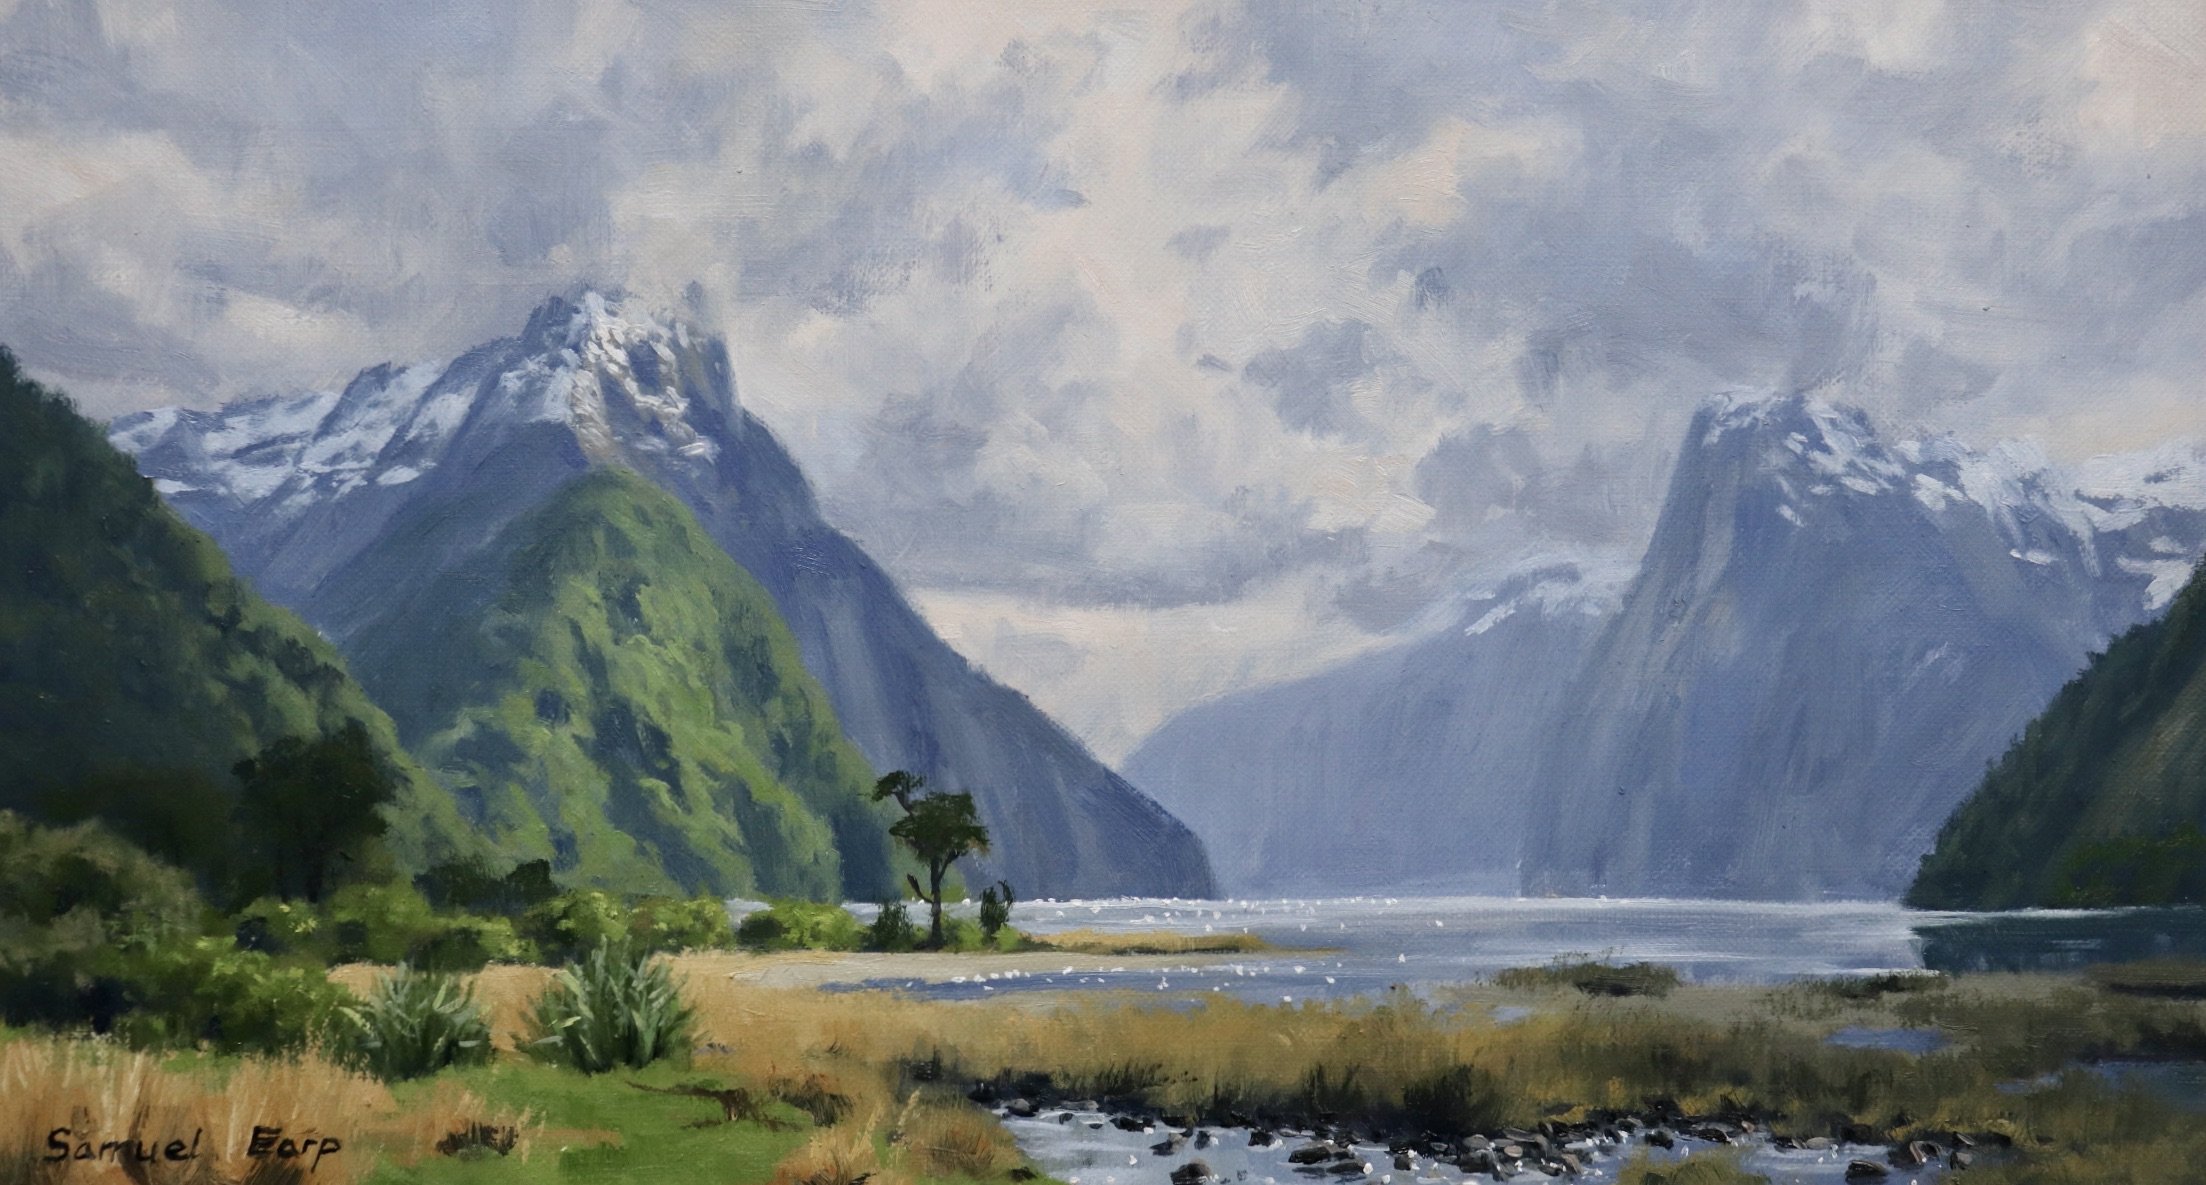 How to Paint a Landscape - Painting Milford Sound